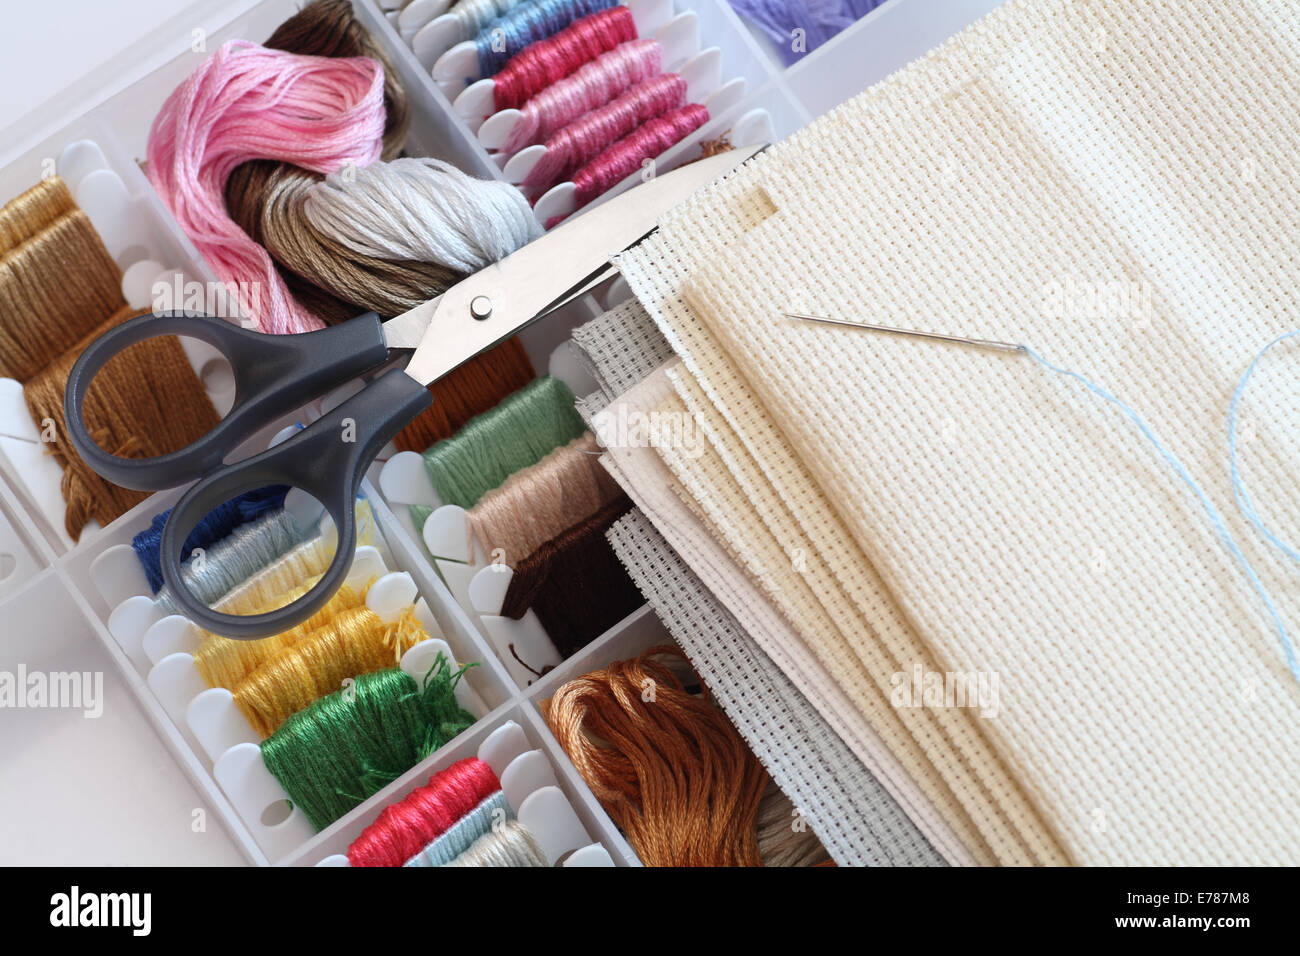 Preparations for embroidery (Cross-Stitch). Close-up Stock Photo